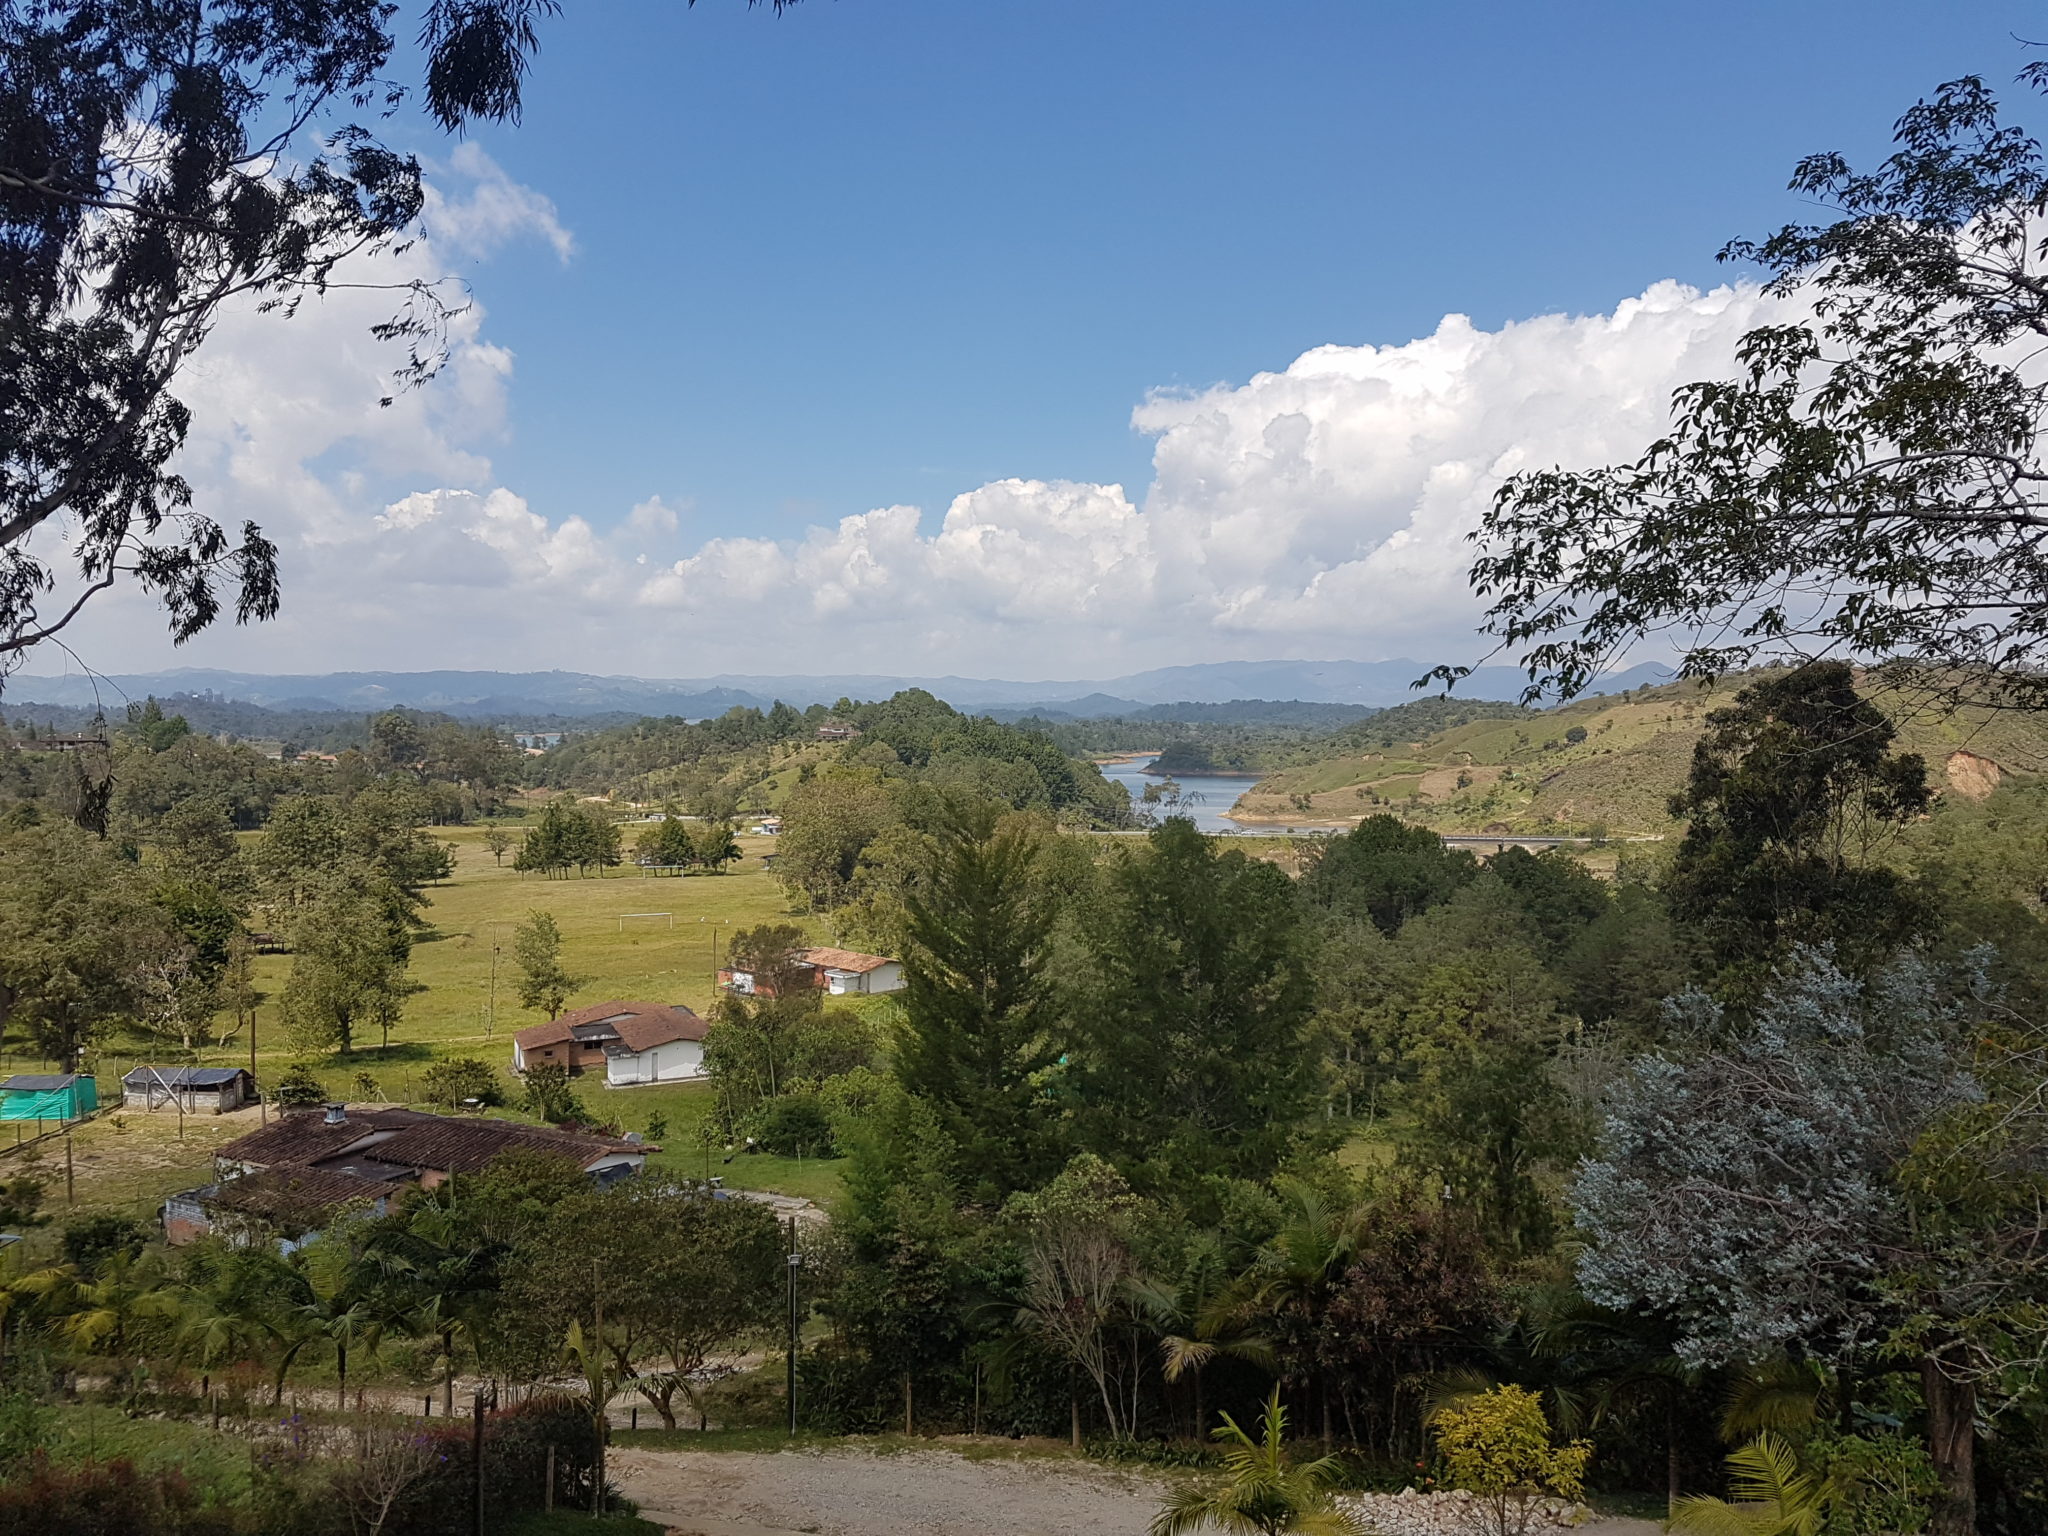 The View from Our Place in Guatapé